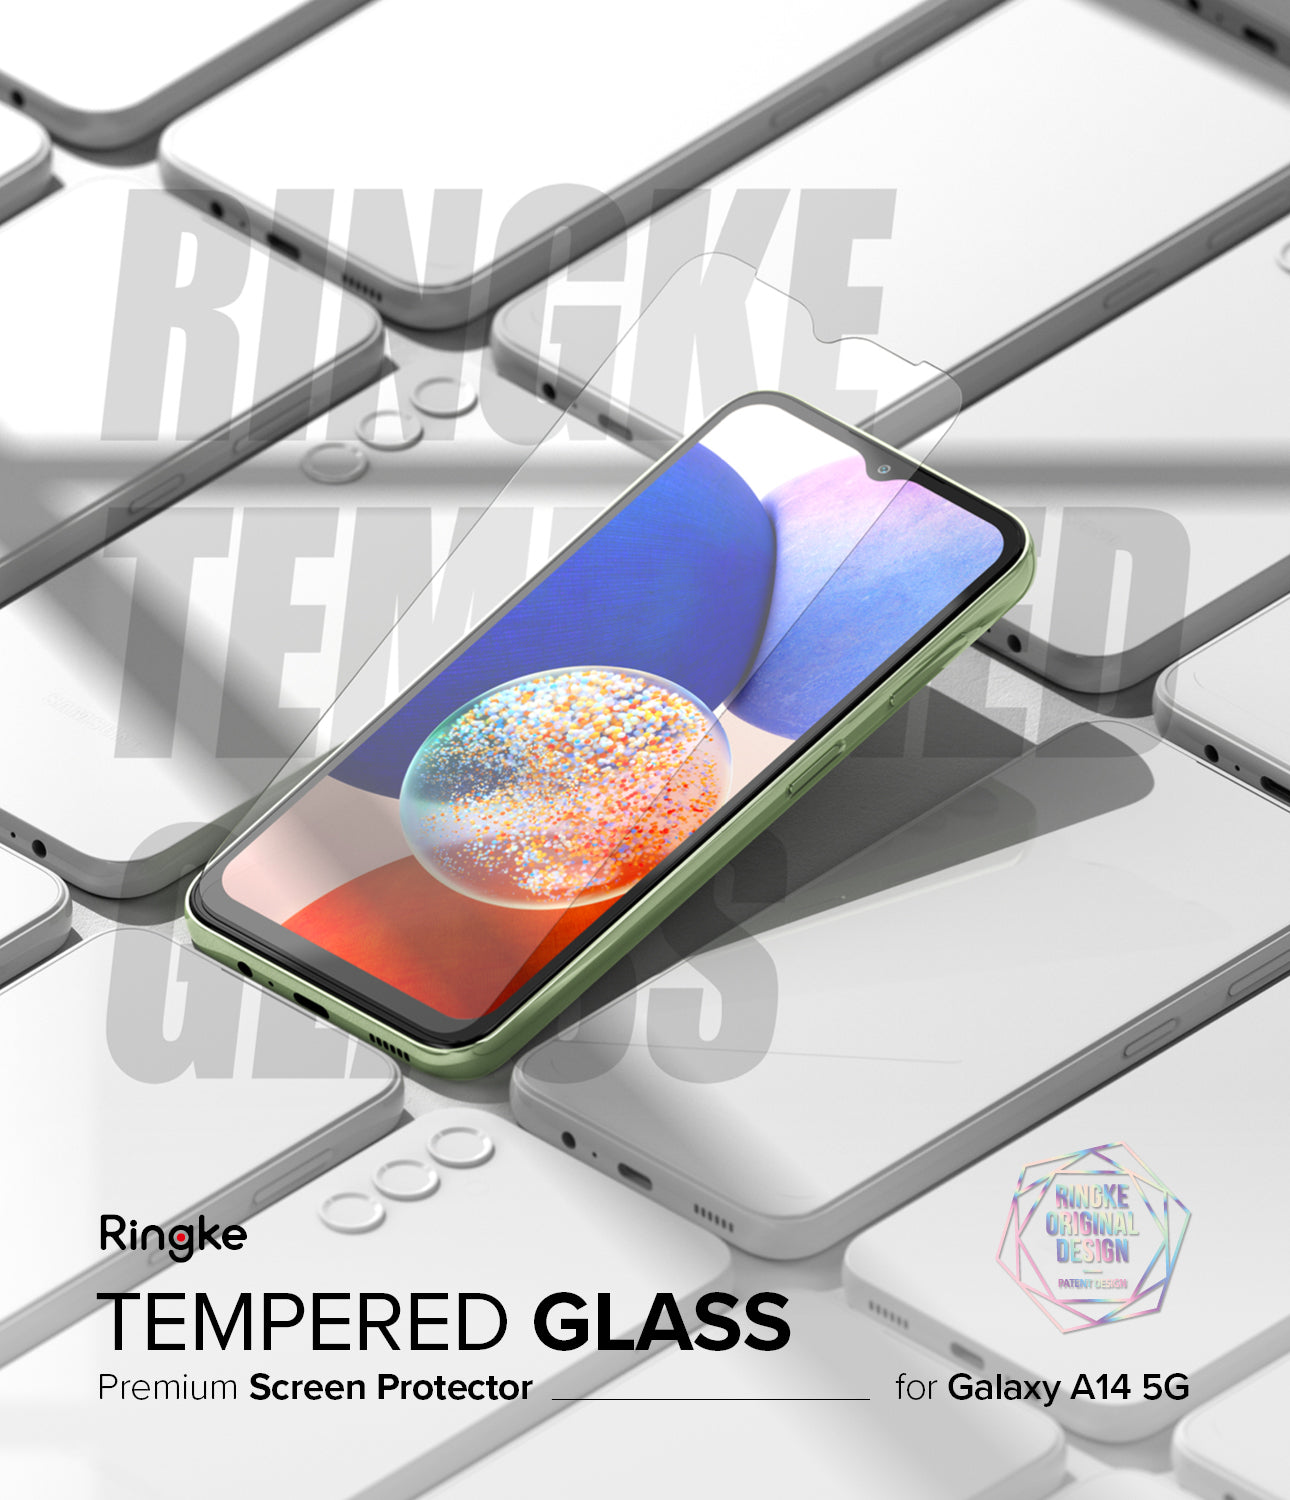 Tempered Glass Premium Screen Protector for Galaxy A14 5G